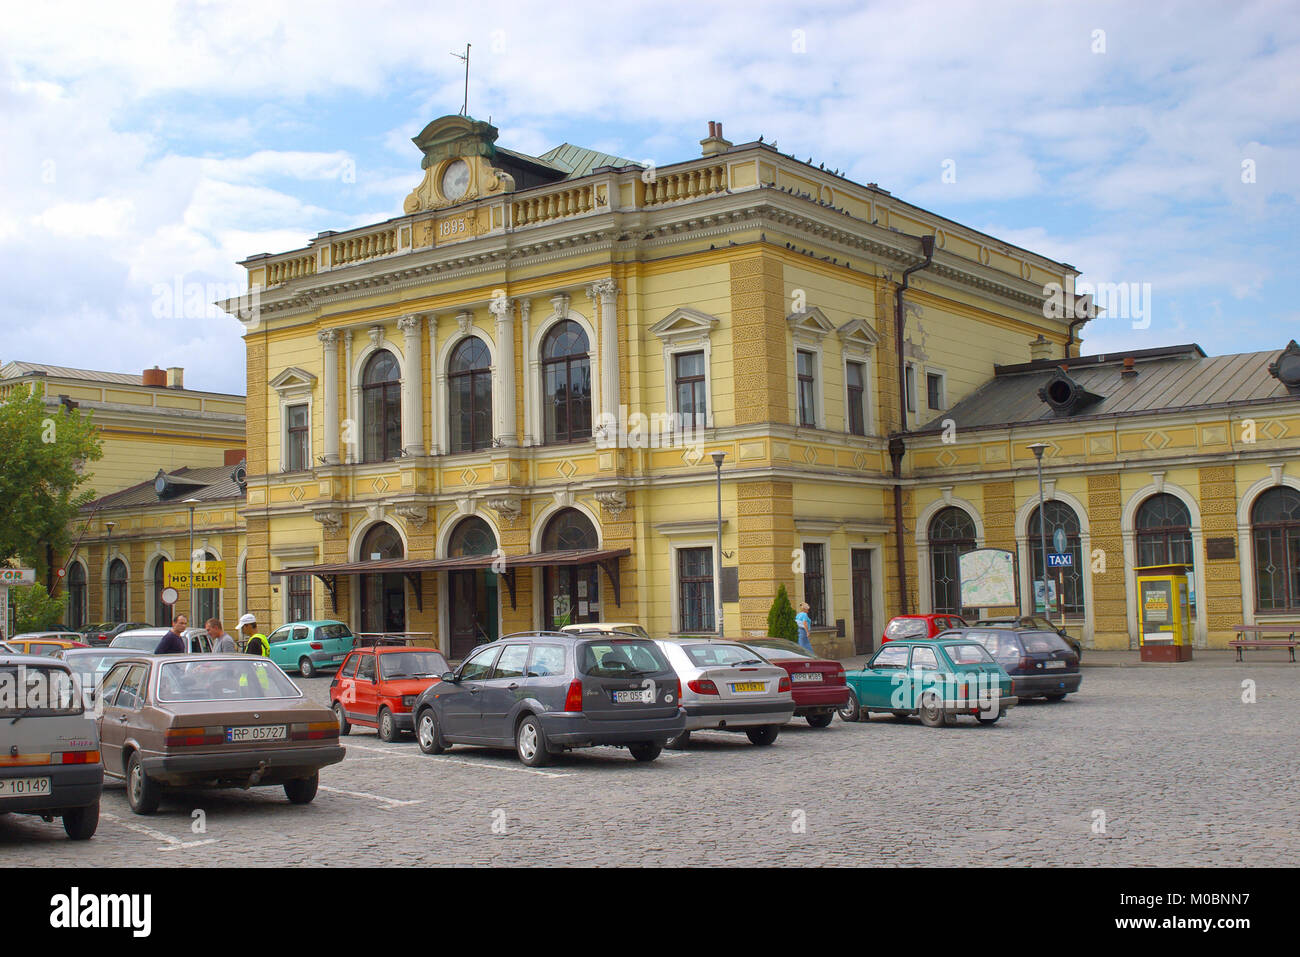 Przemysl, Poland - August 24, 2006: People in front of the main train station. The station opened in 1860 and reconstructed in 1895 in neo-baroque sty Stock Photo